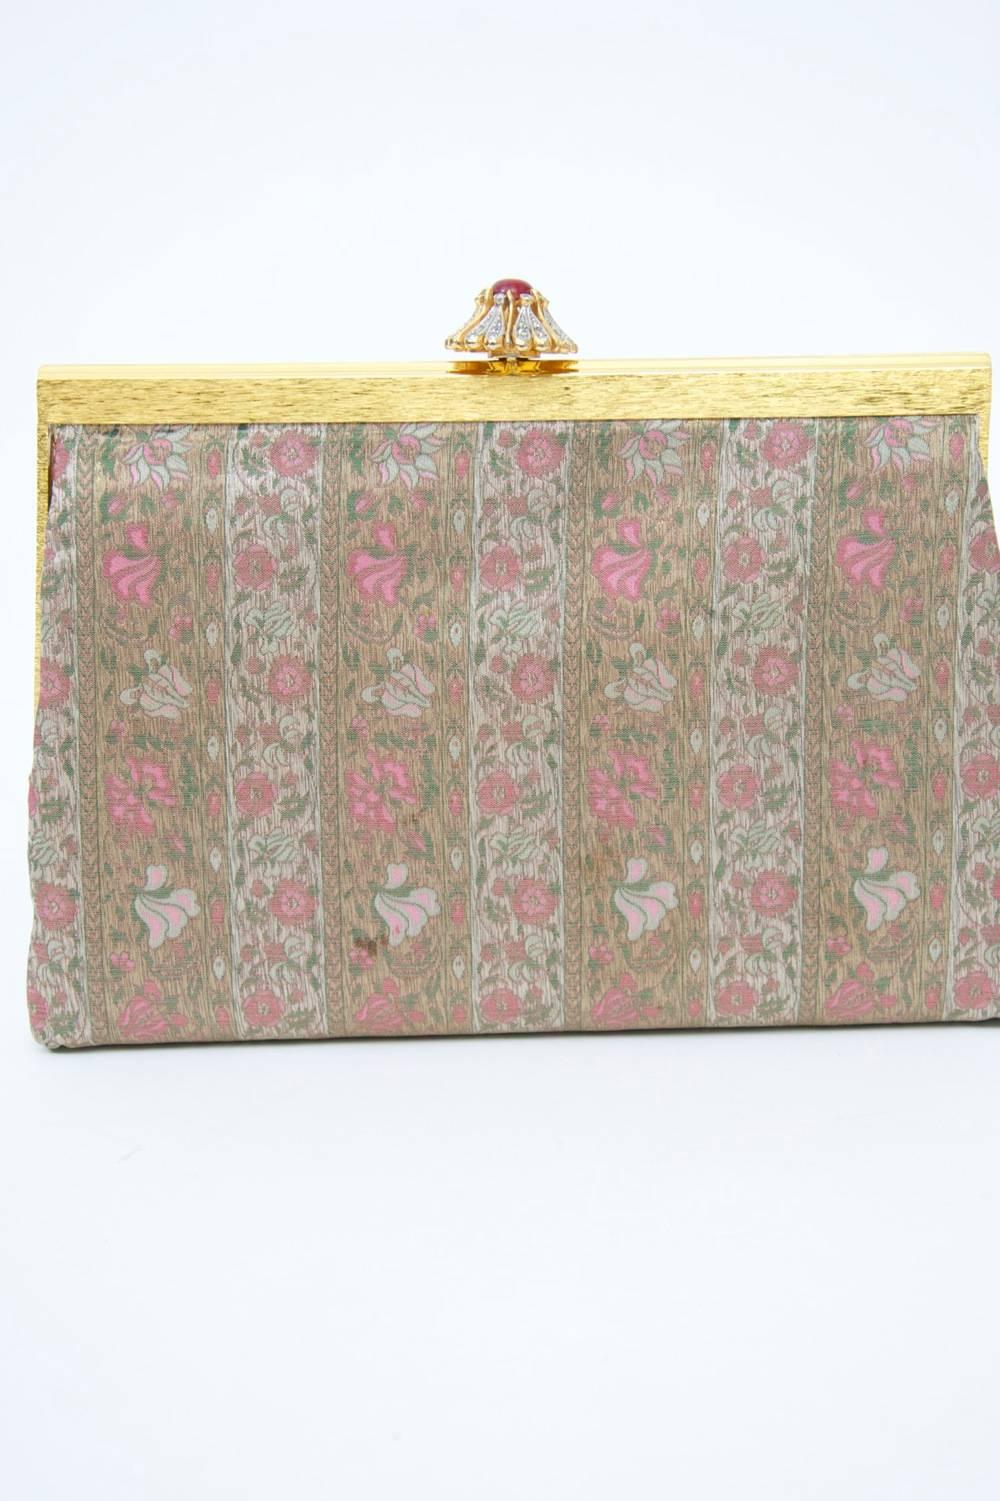 Floral pattern clutch in a subtle palette of pinks and greens by Koret, known as one of the best creators of handbags in mid-century America. This evening clutch has a textured gold frame complemented by a flower-shaped clasp of rhinestones